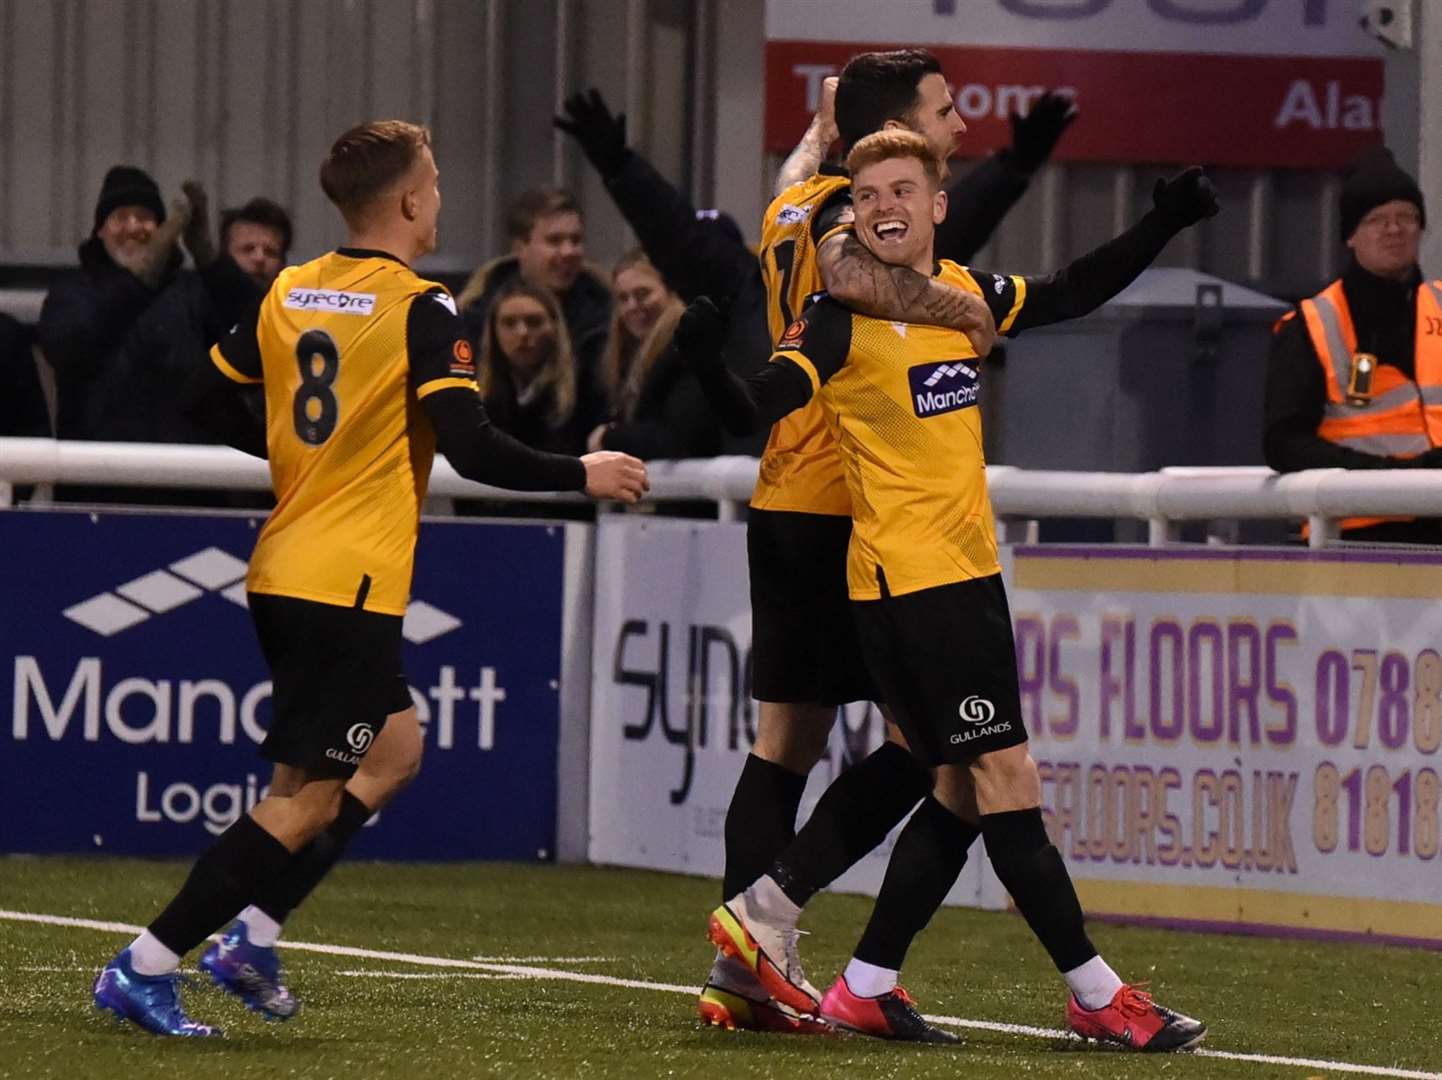 Jack Barham celebrates Maidstone's third goal with Joan Luque and Sam Corne Picture: Steve Terrell